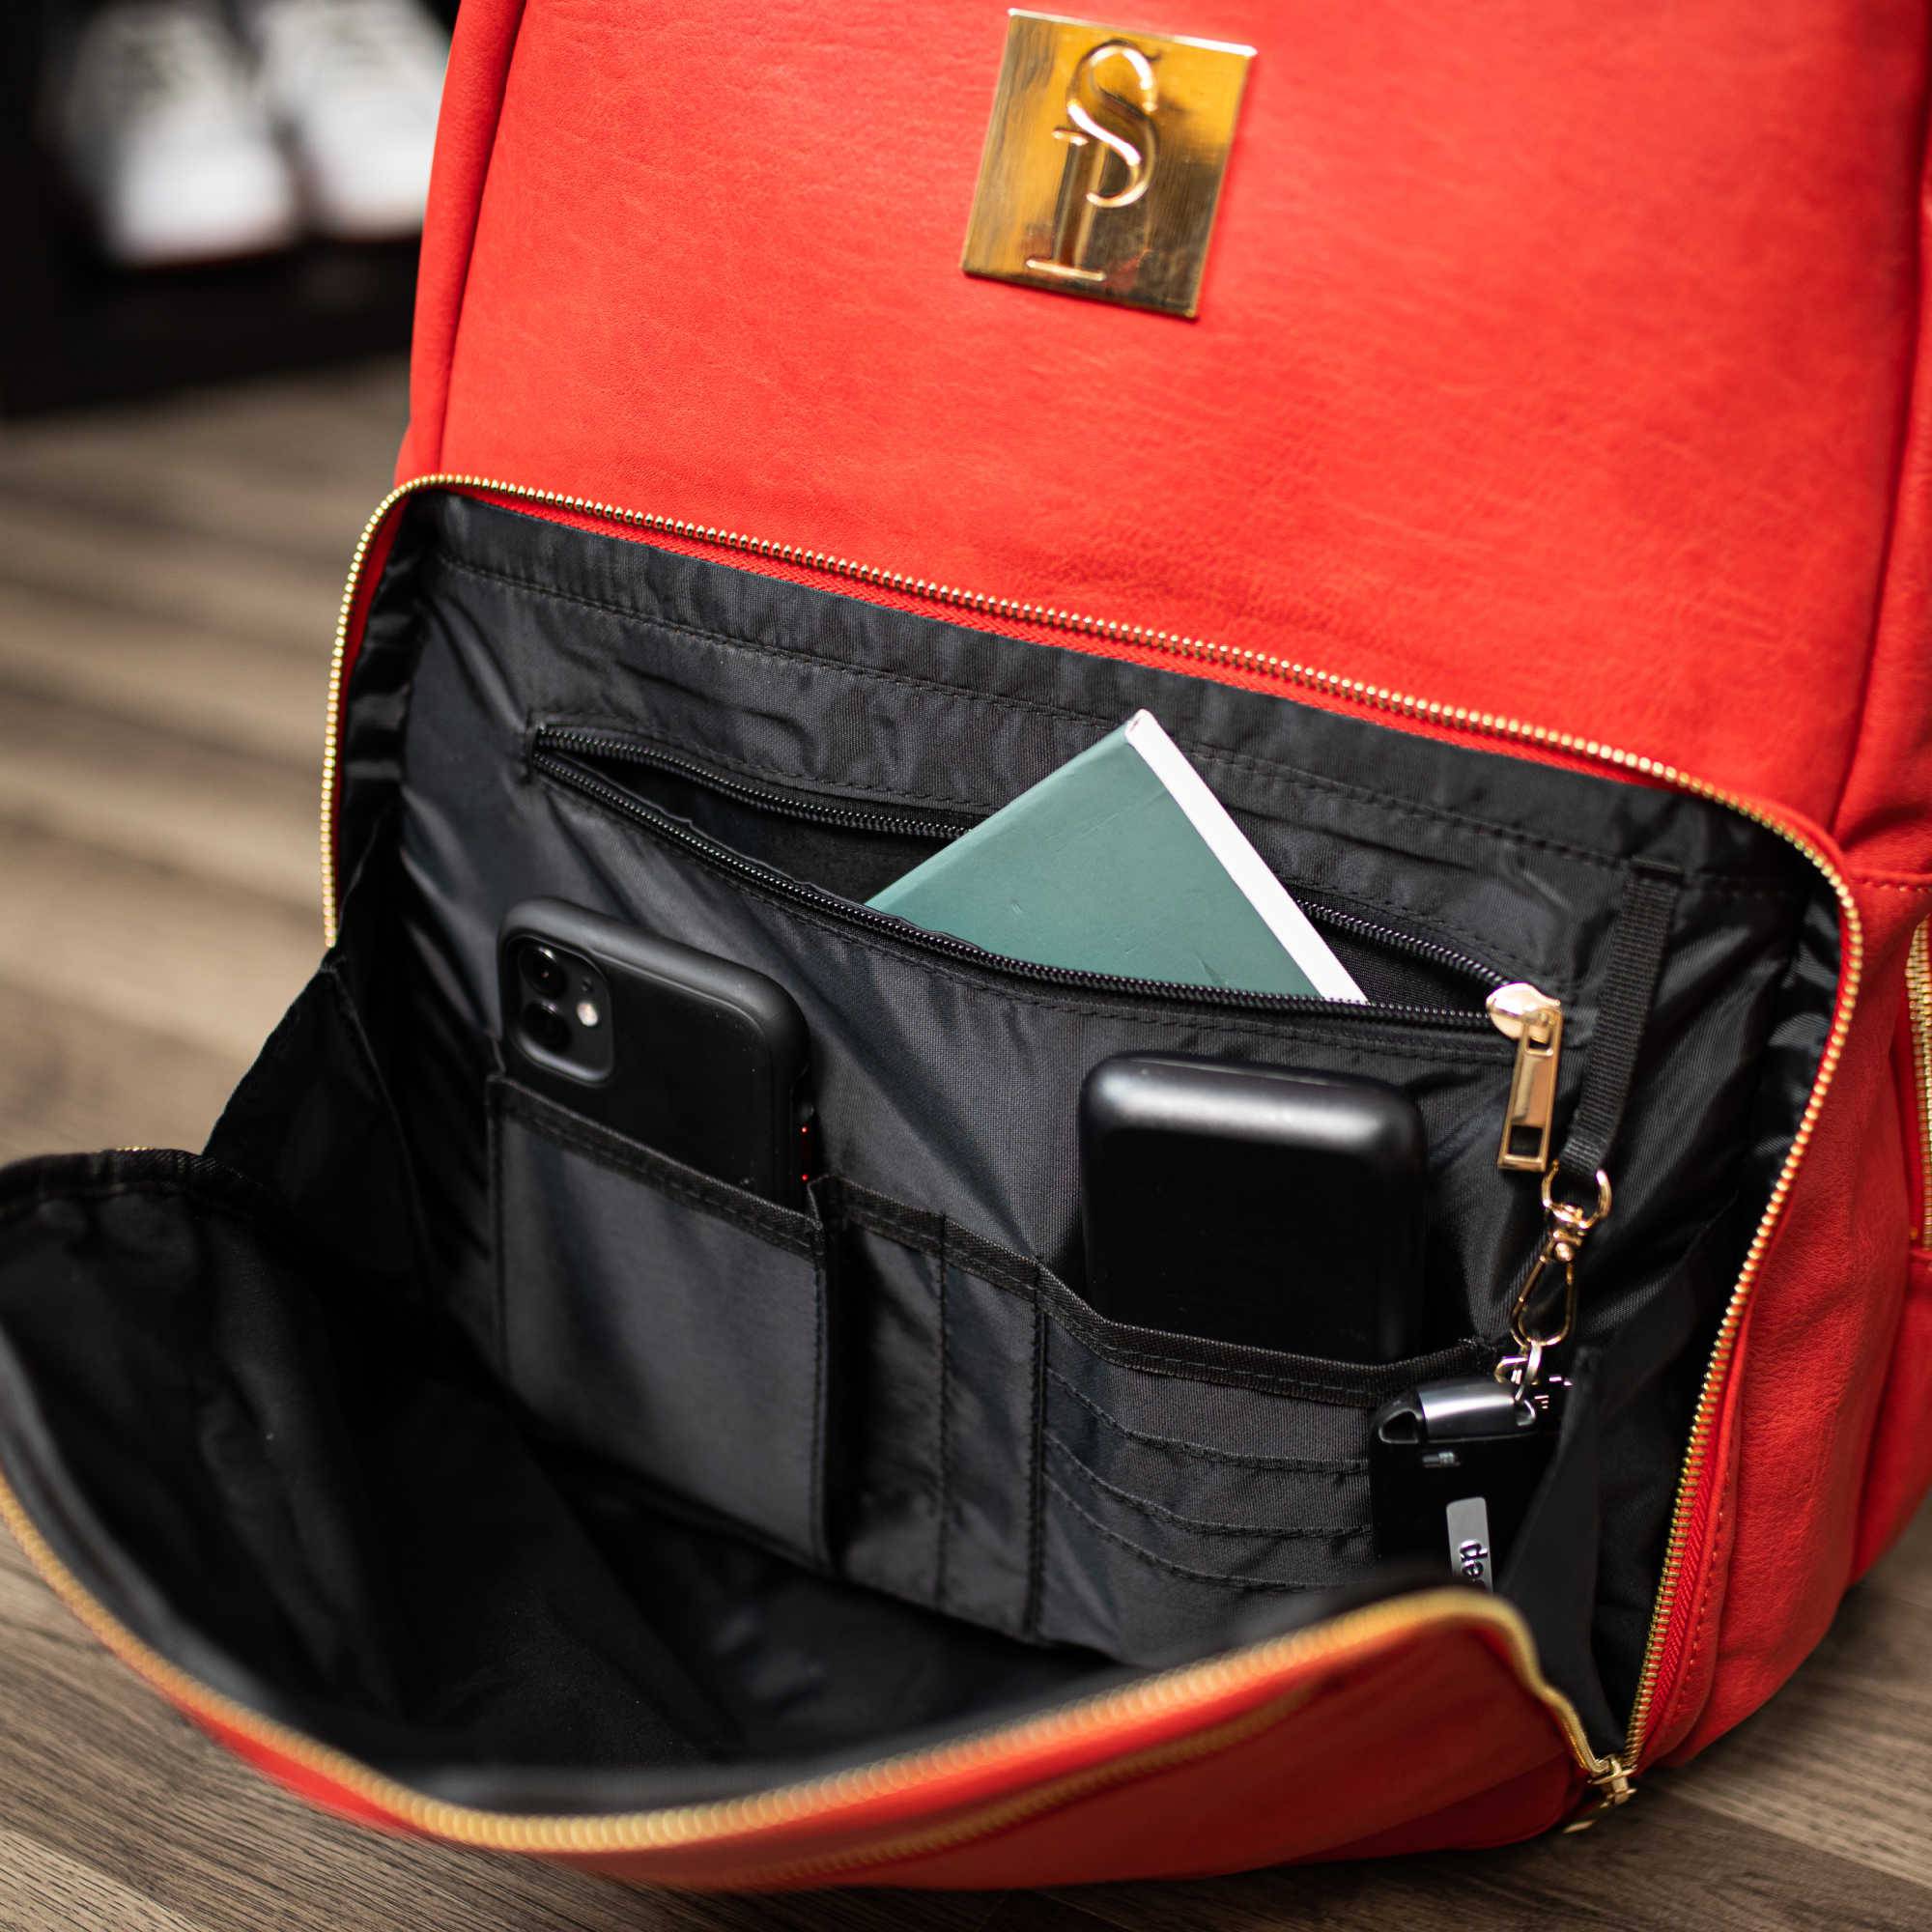 Red Tumbled Leather Daily Commuter Bag - Sole Premise